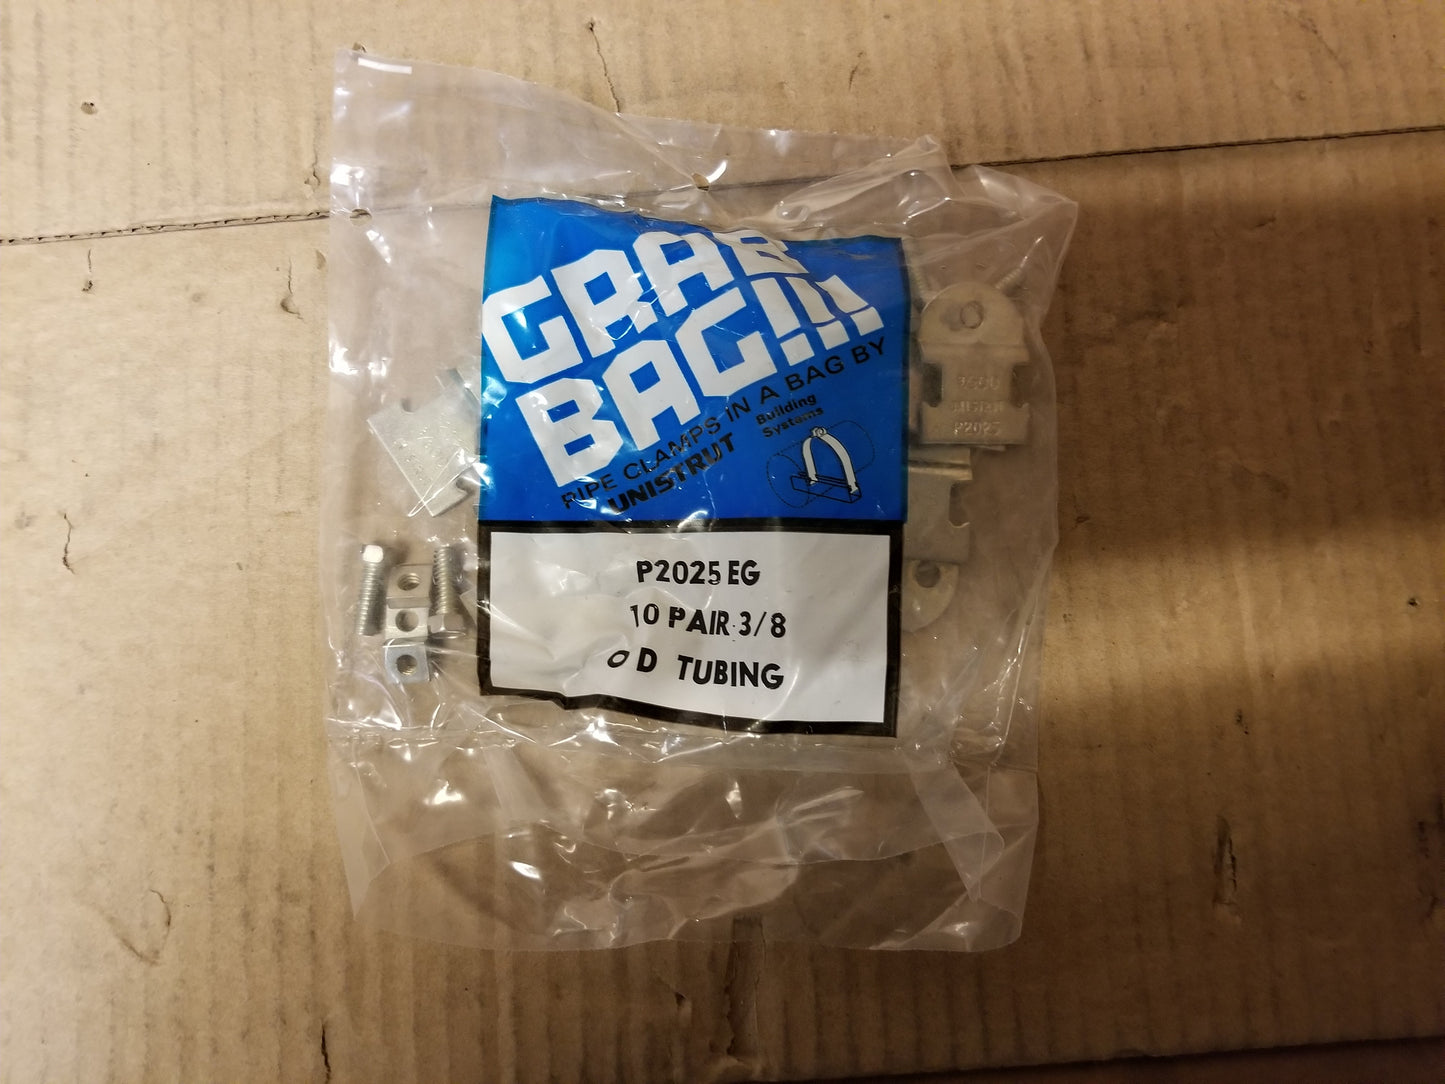 3/8" OD TUBING PIPE CLAMPS(SOLD 10 PER BAG)